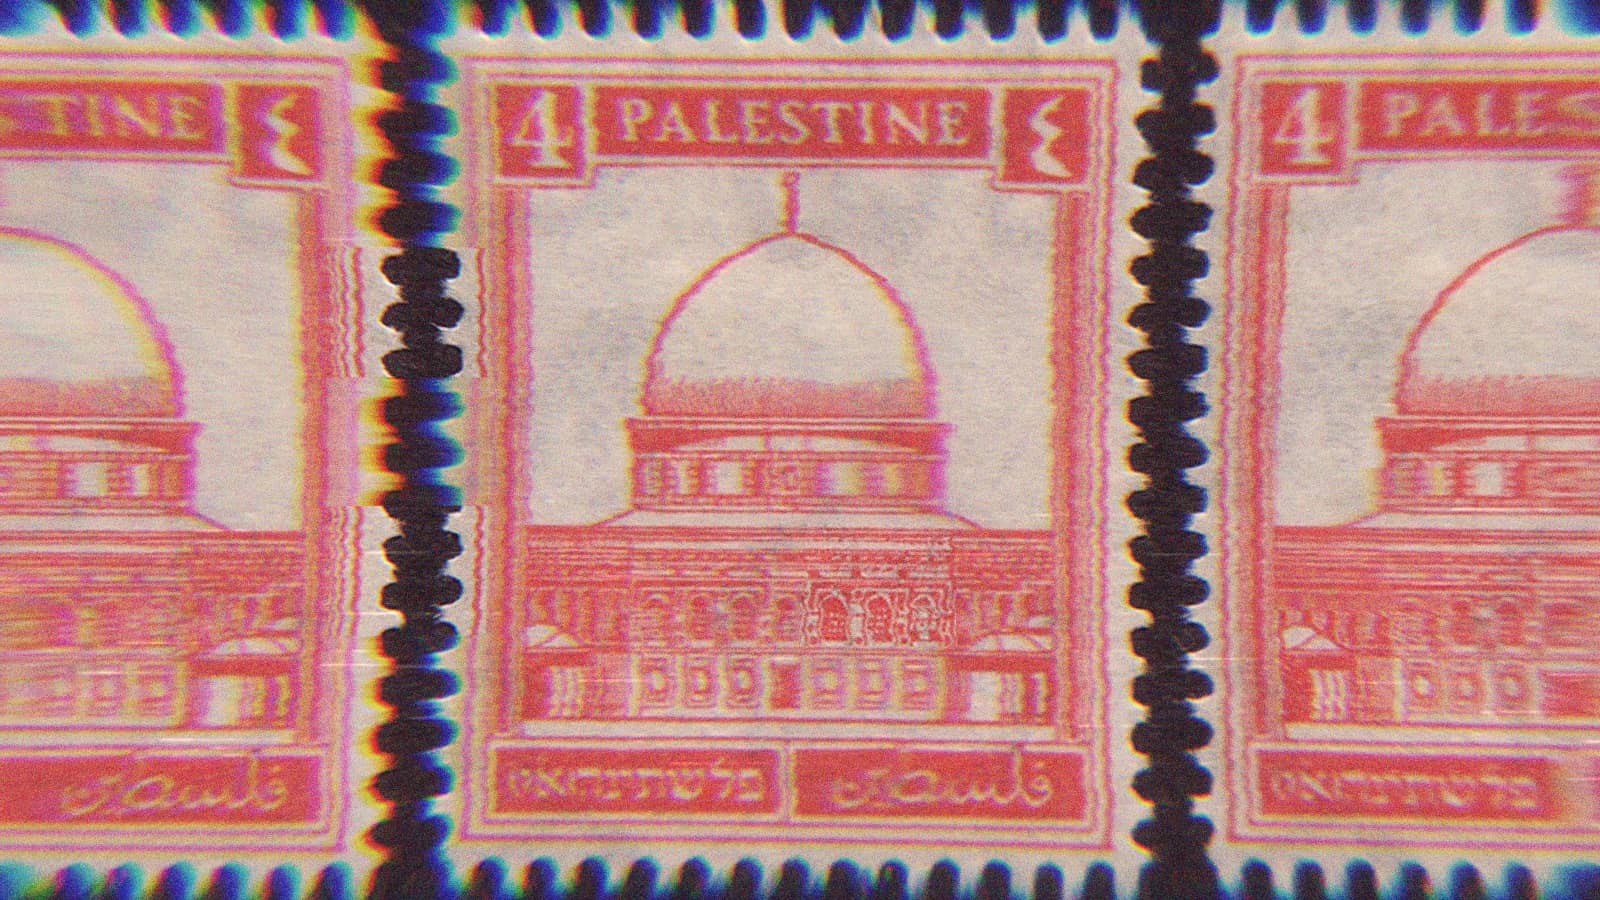 Palestine Mandate Stamp, SG no. 92, 4 Mils, thin paper variety, issued 1927, depicting the Dome of the Rock.